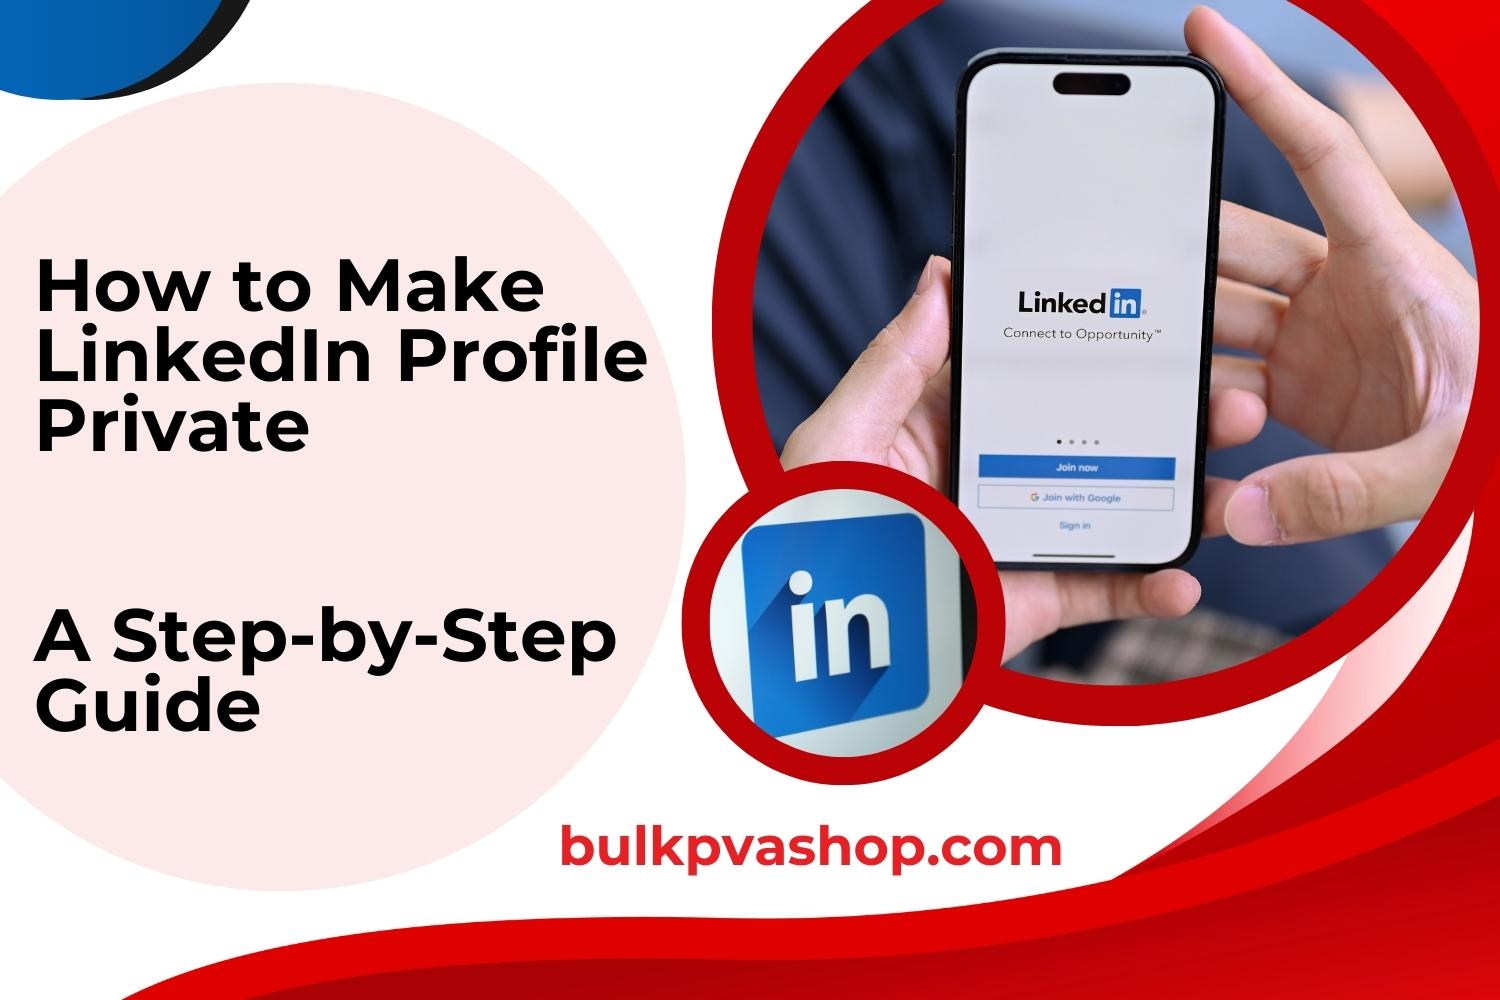 How to Make LinkedIn Profile Private: A Step-by-Step Guide